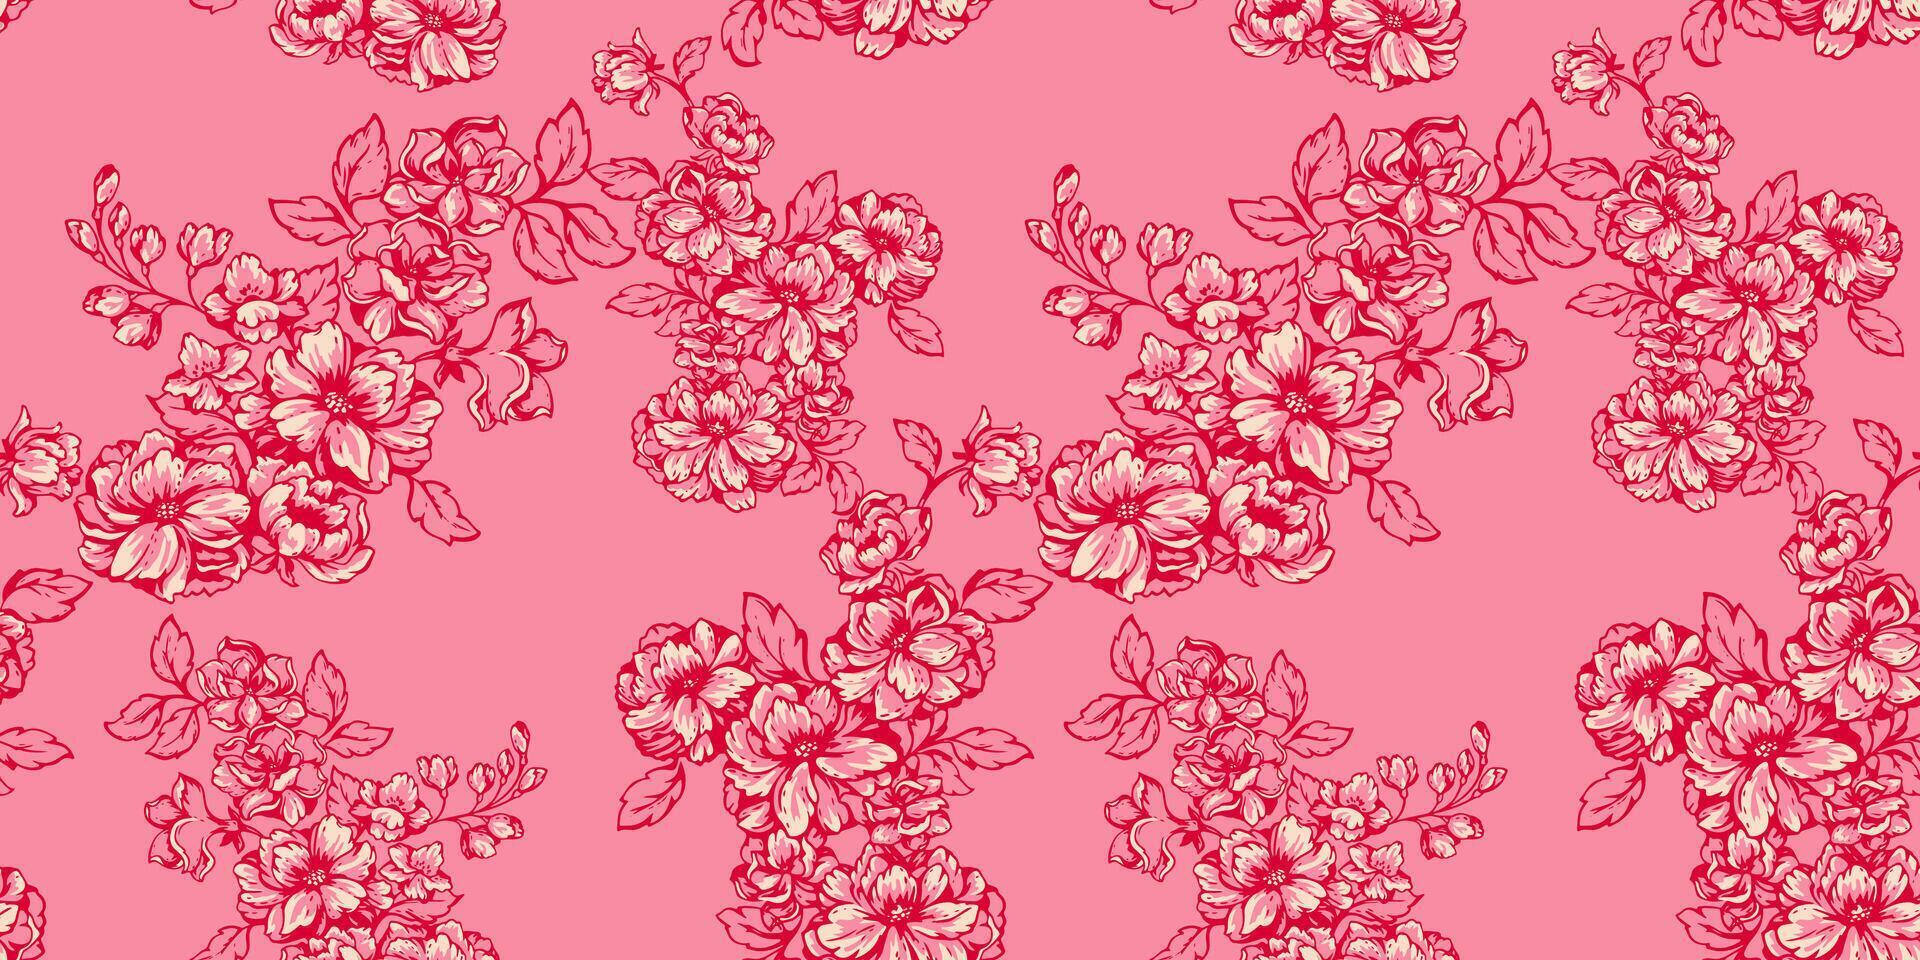 Artistic, abstract branches with flowers, buds, leaves seamless pattern. Stylized simple floral tapestry on a pink background. Vector hand drawn lines outline of flower print. Template for design